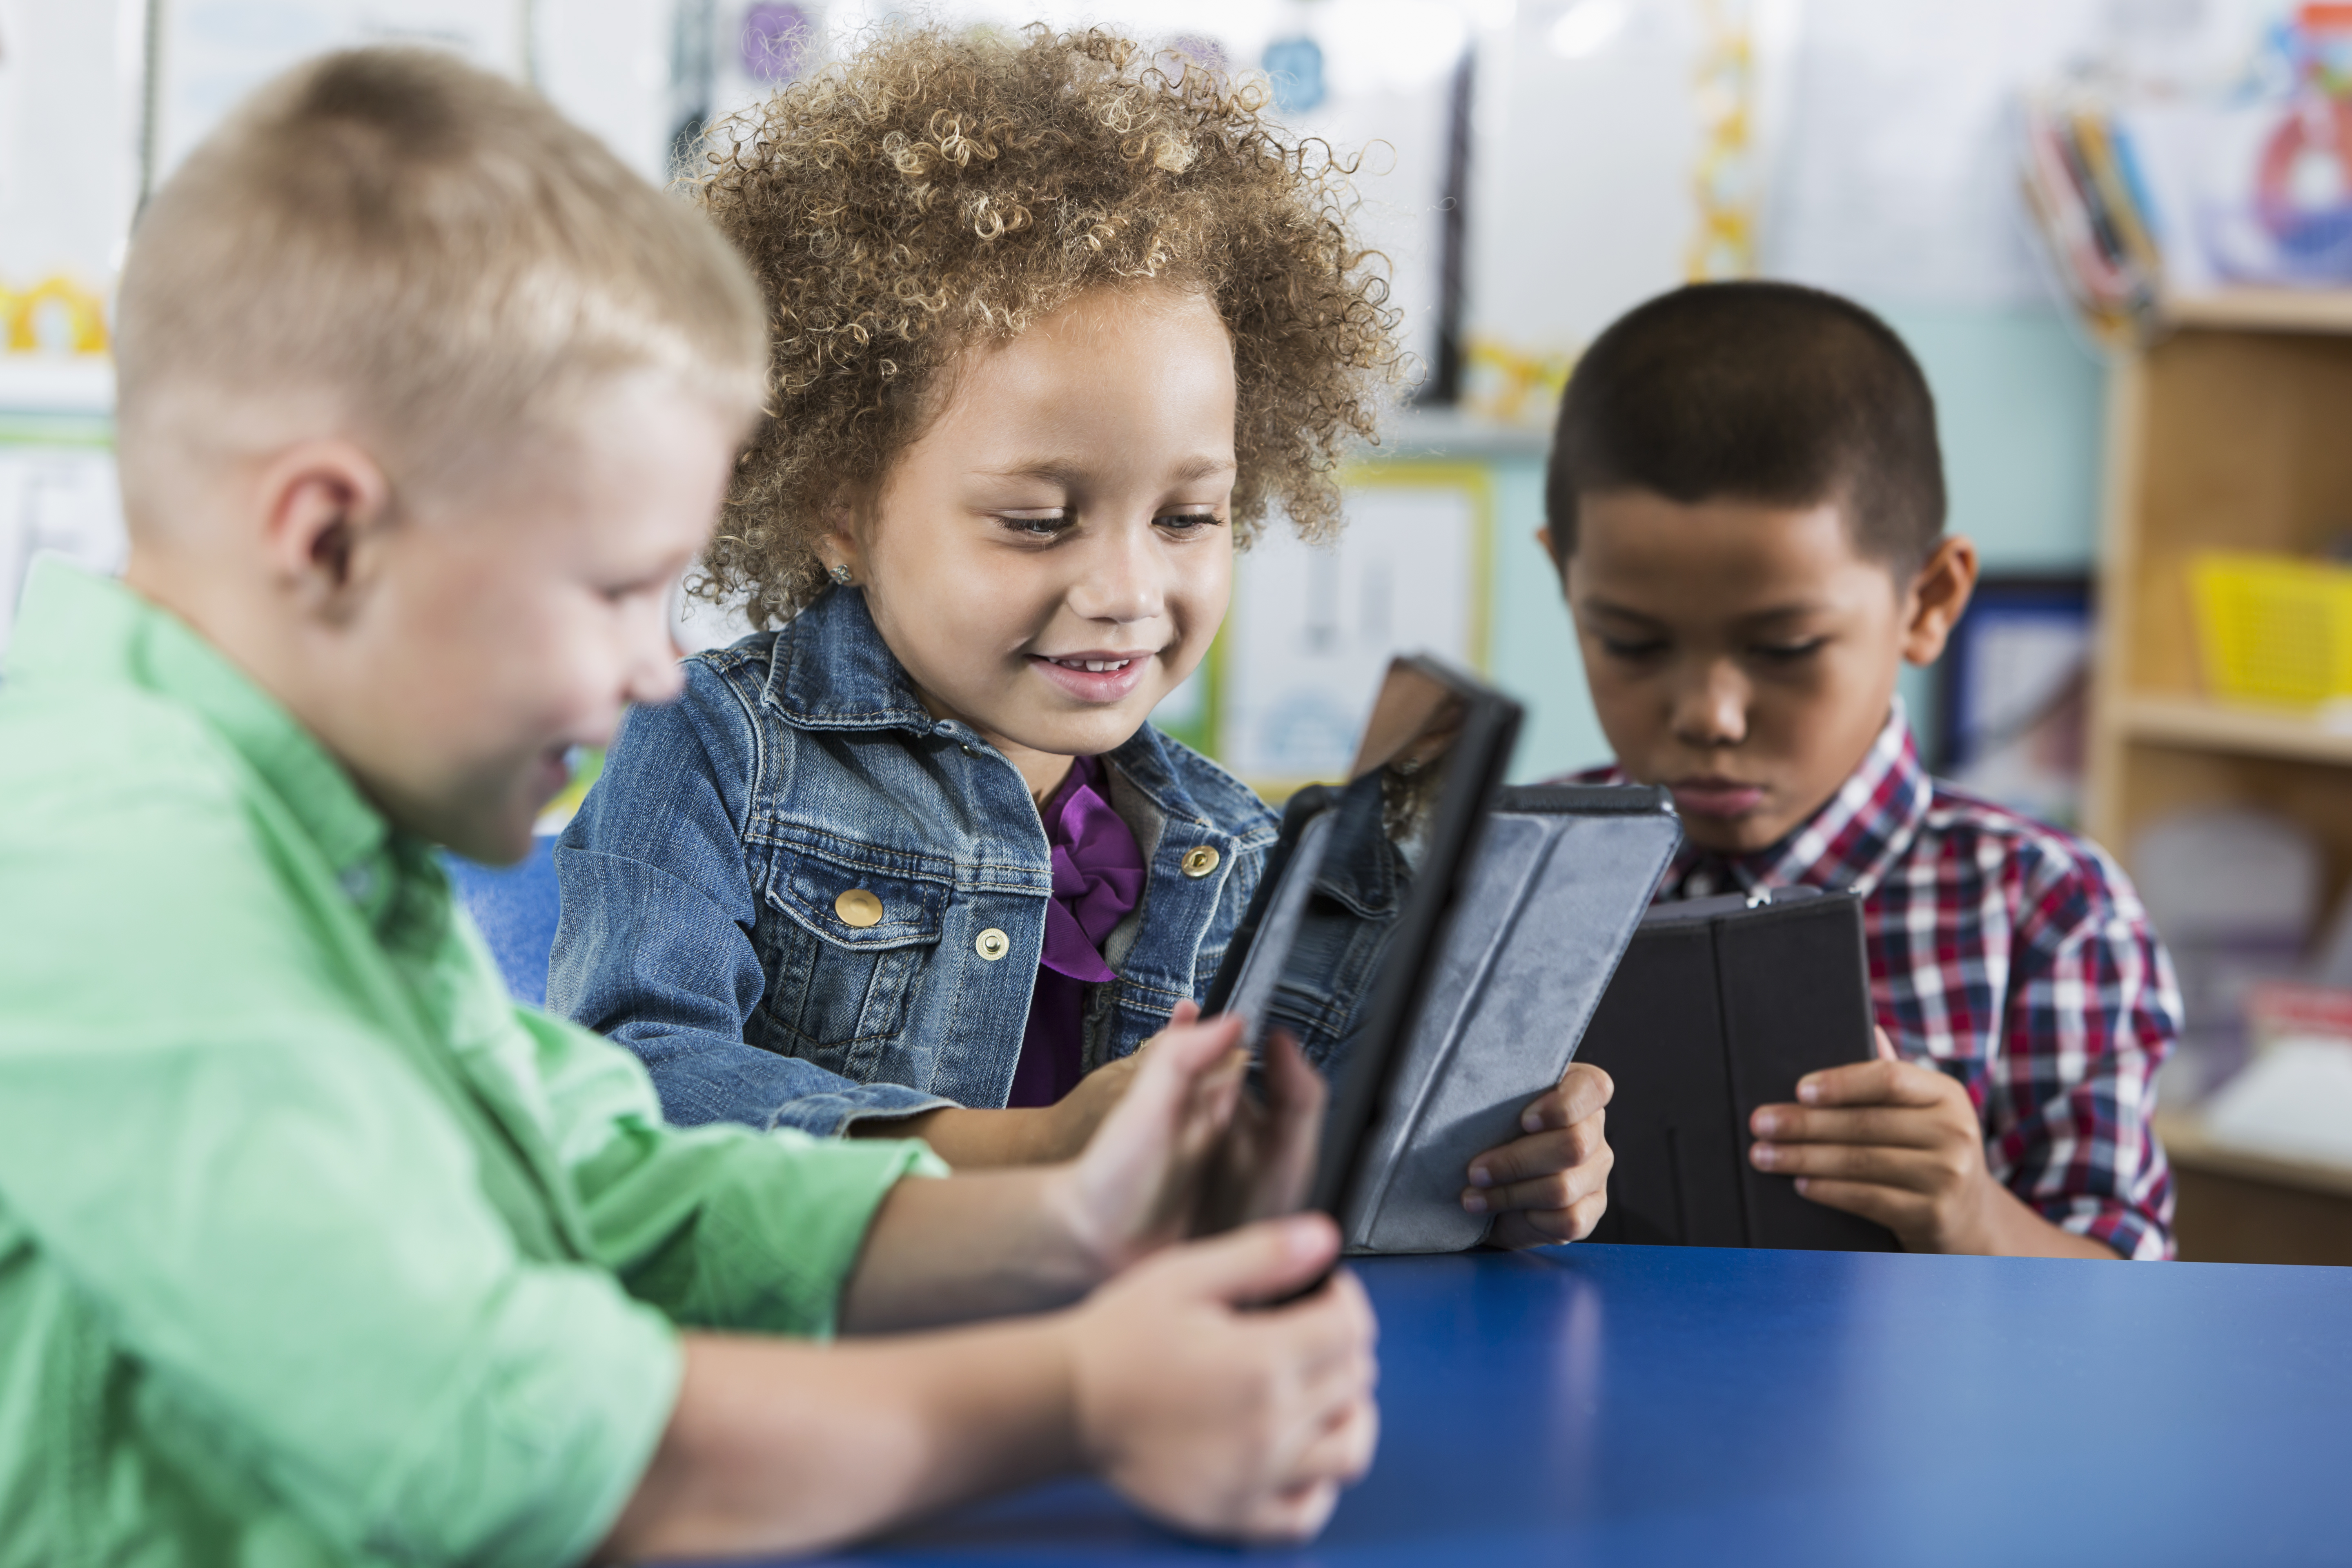 How to Use Gameplay to Enhance Classroom Learning